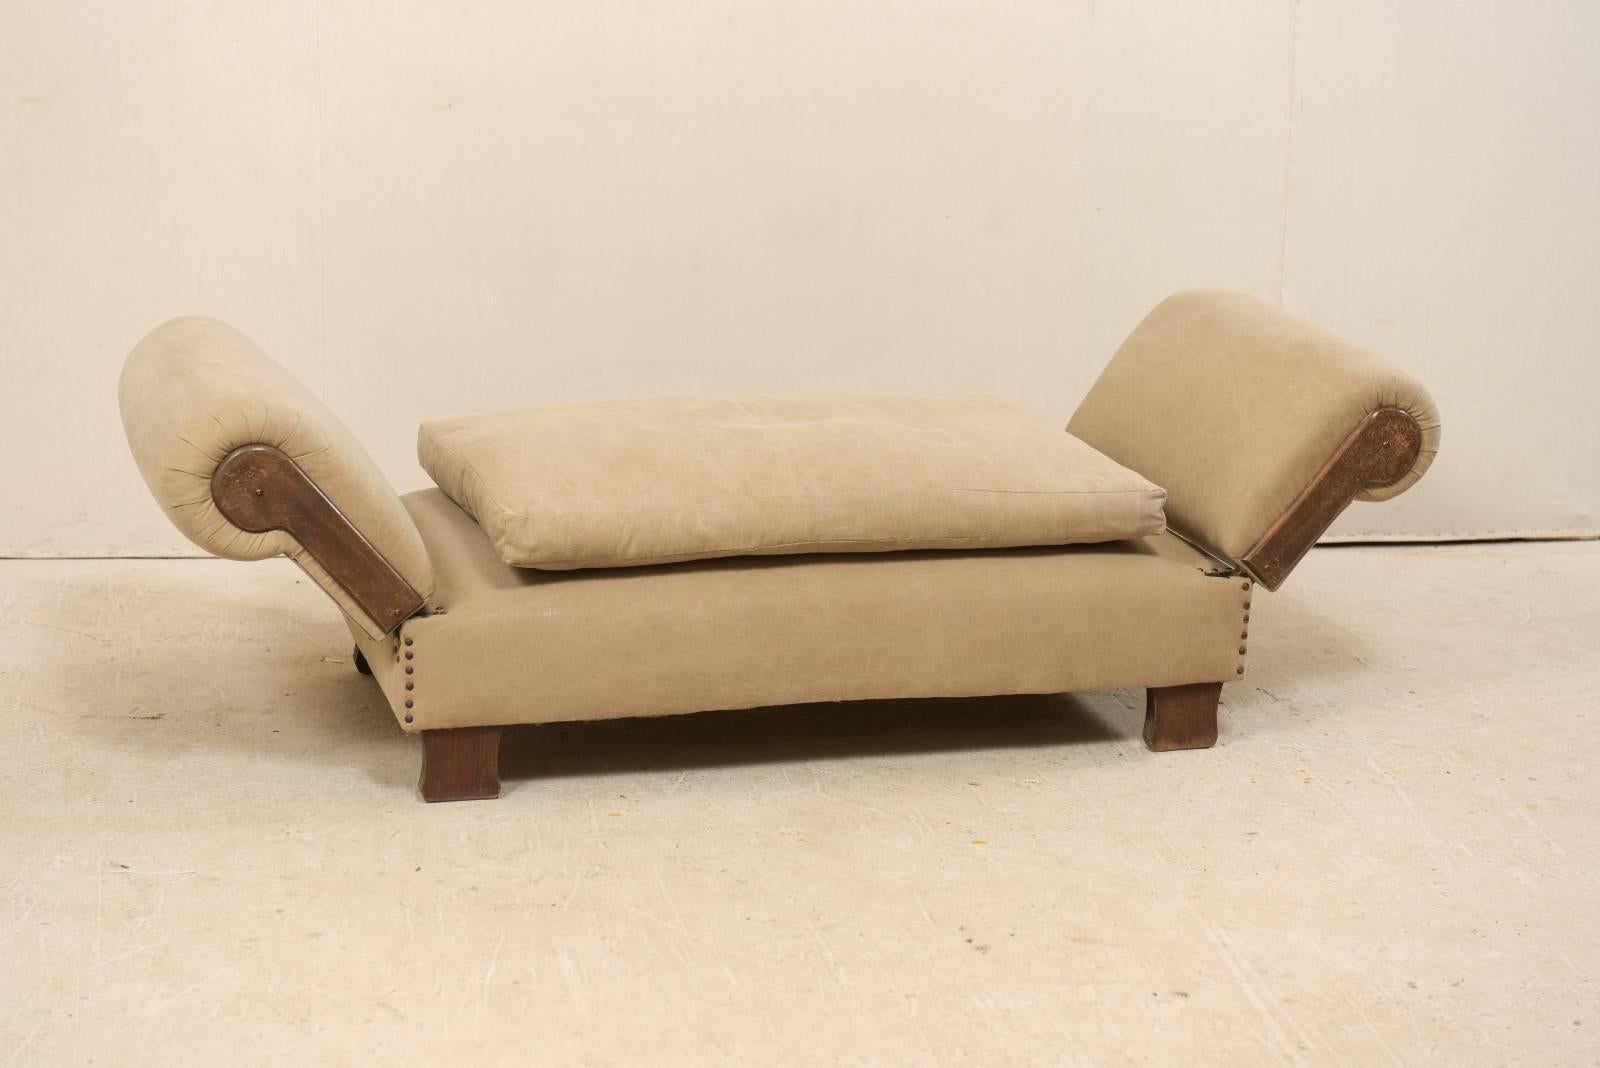 French Lit De Jour ‘Daybed’ circa 1920s-1930s with Nice Rounded Arms In Good Condition For Sale In Atlanta, GA